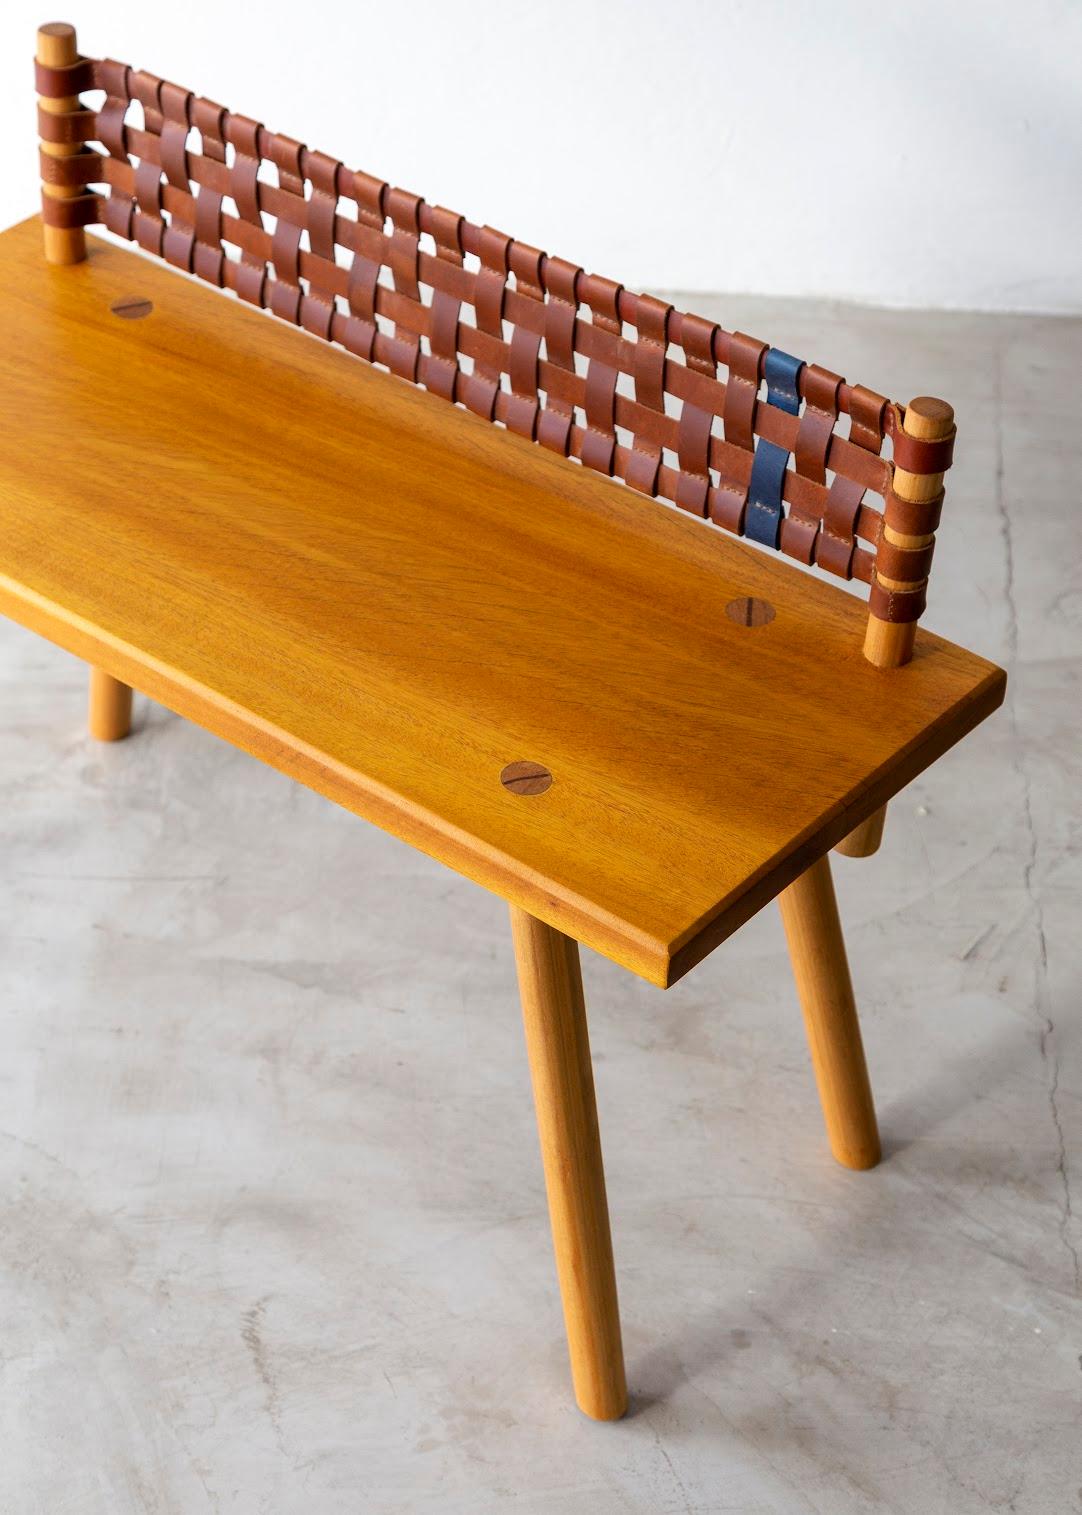 Wooden and natural leather Bench ' Horizonte' - Brazilian design by André Bianco In New Condition For Sale In Balneário Camboriú, SC